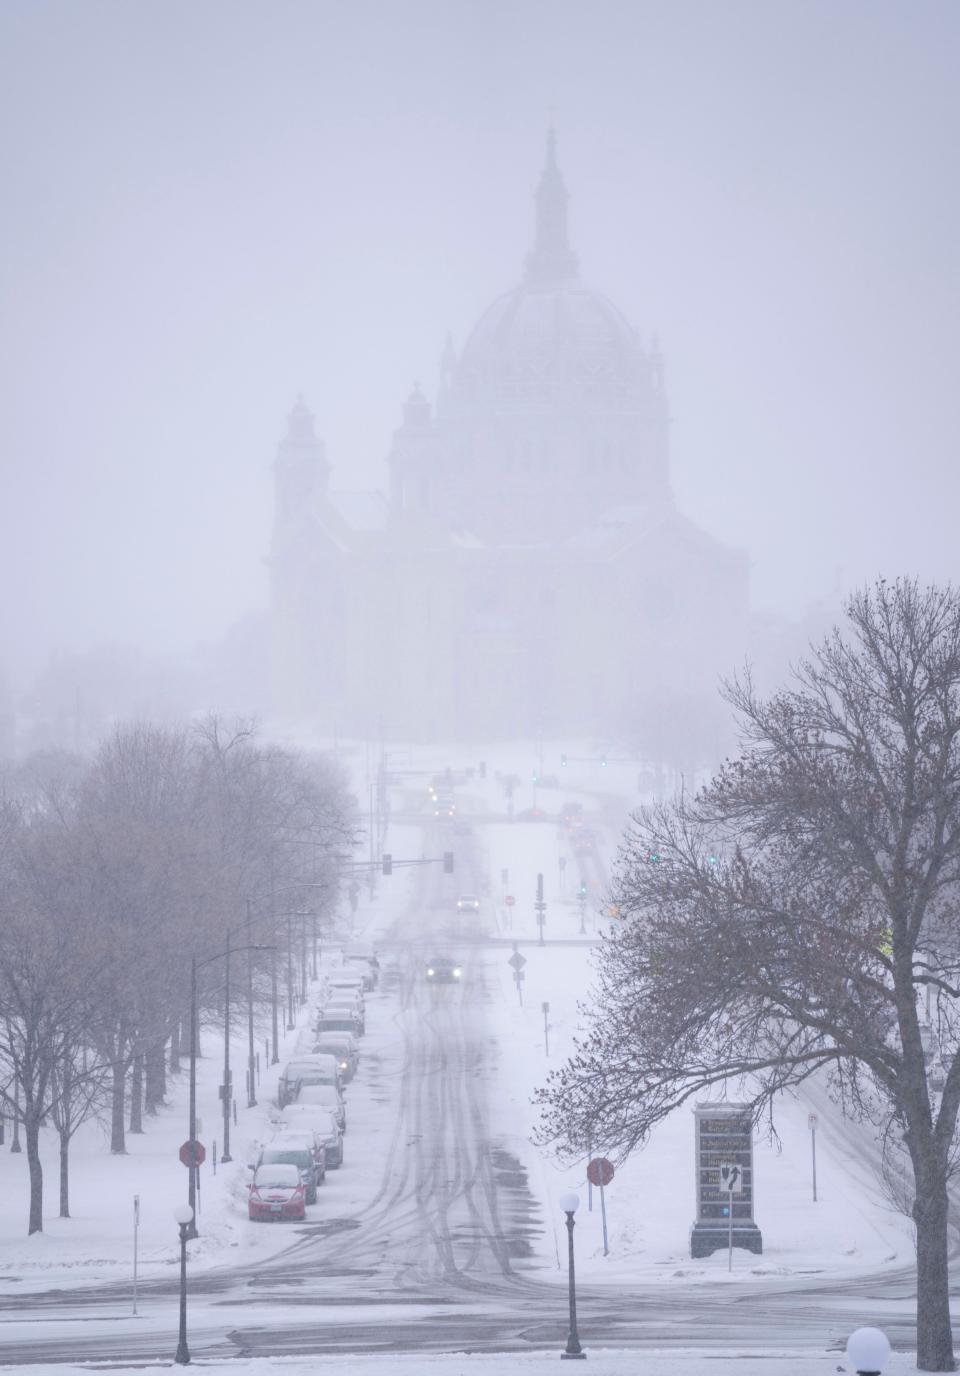 Snow begins to fall around the Cathedral of Saint Paul, on Tuesday, February 21  at the Minnesota State Capitol in St. Paul, Minnesota. A monster winter storm took aim at the Upper Midwest on Tuesday (Alex Kormann/Star Tribune via AP) (AP)